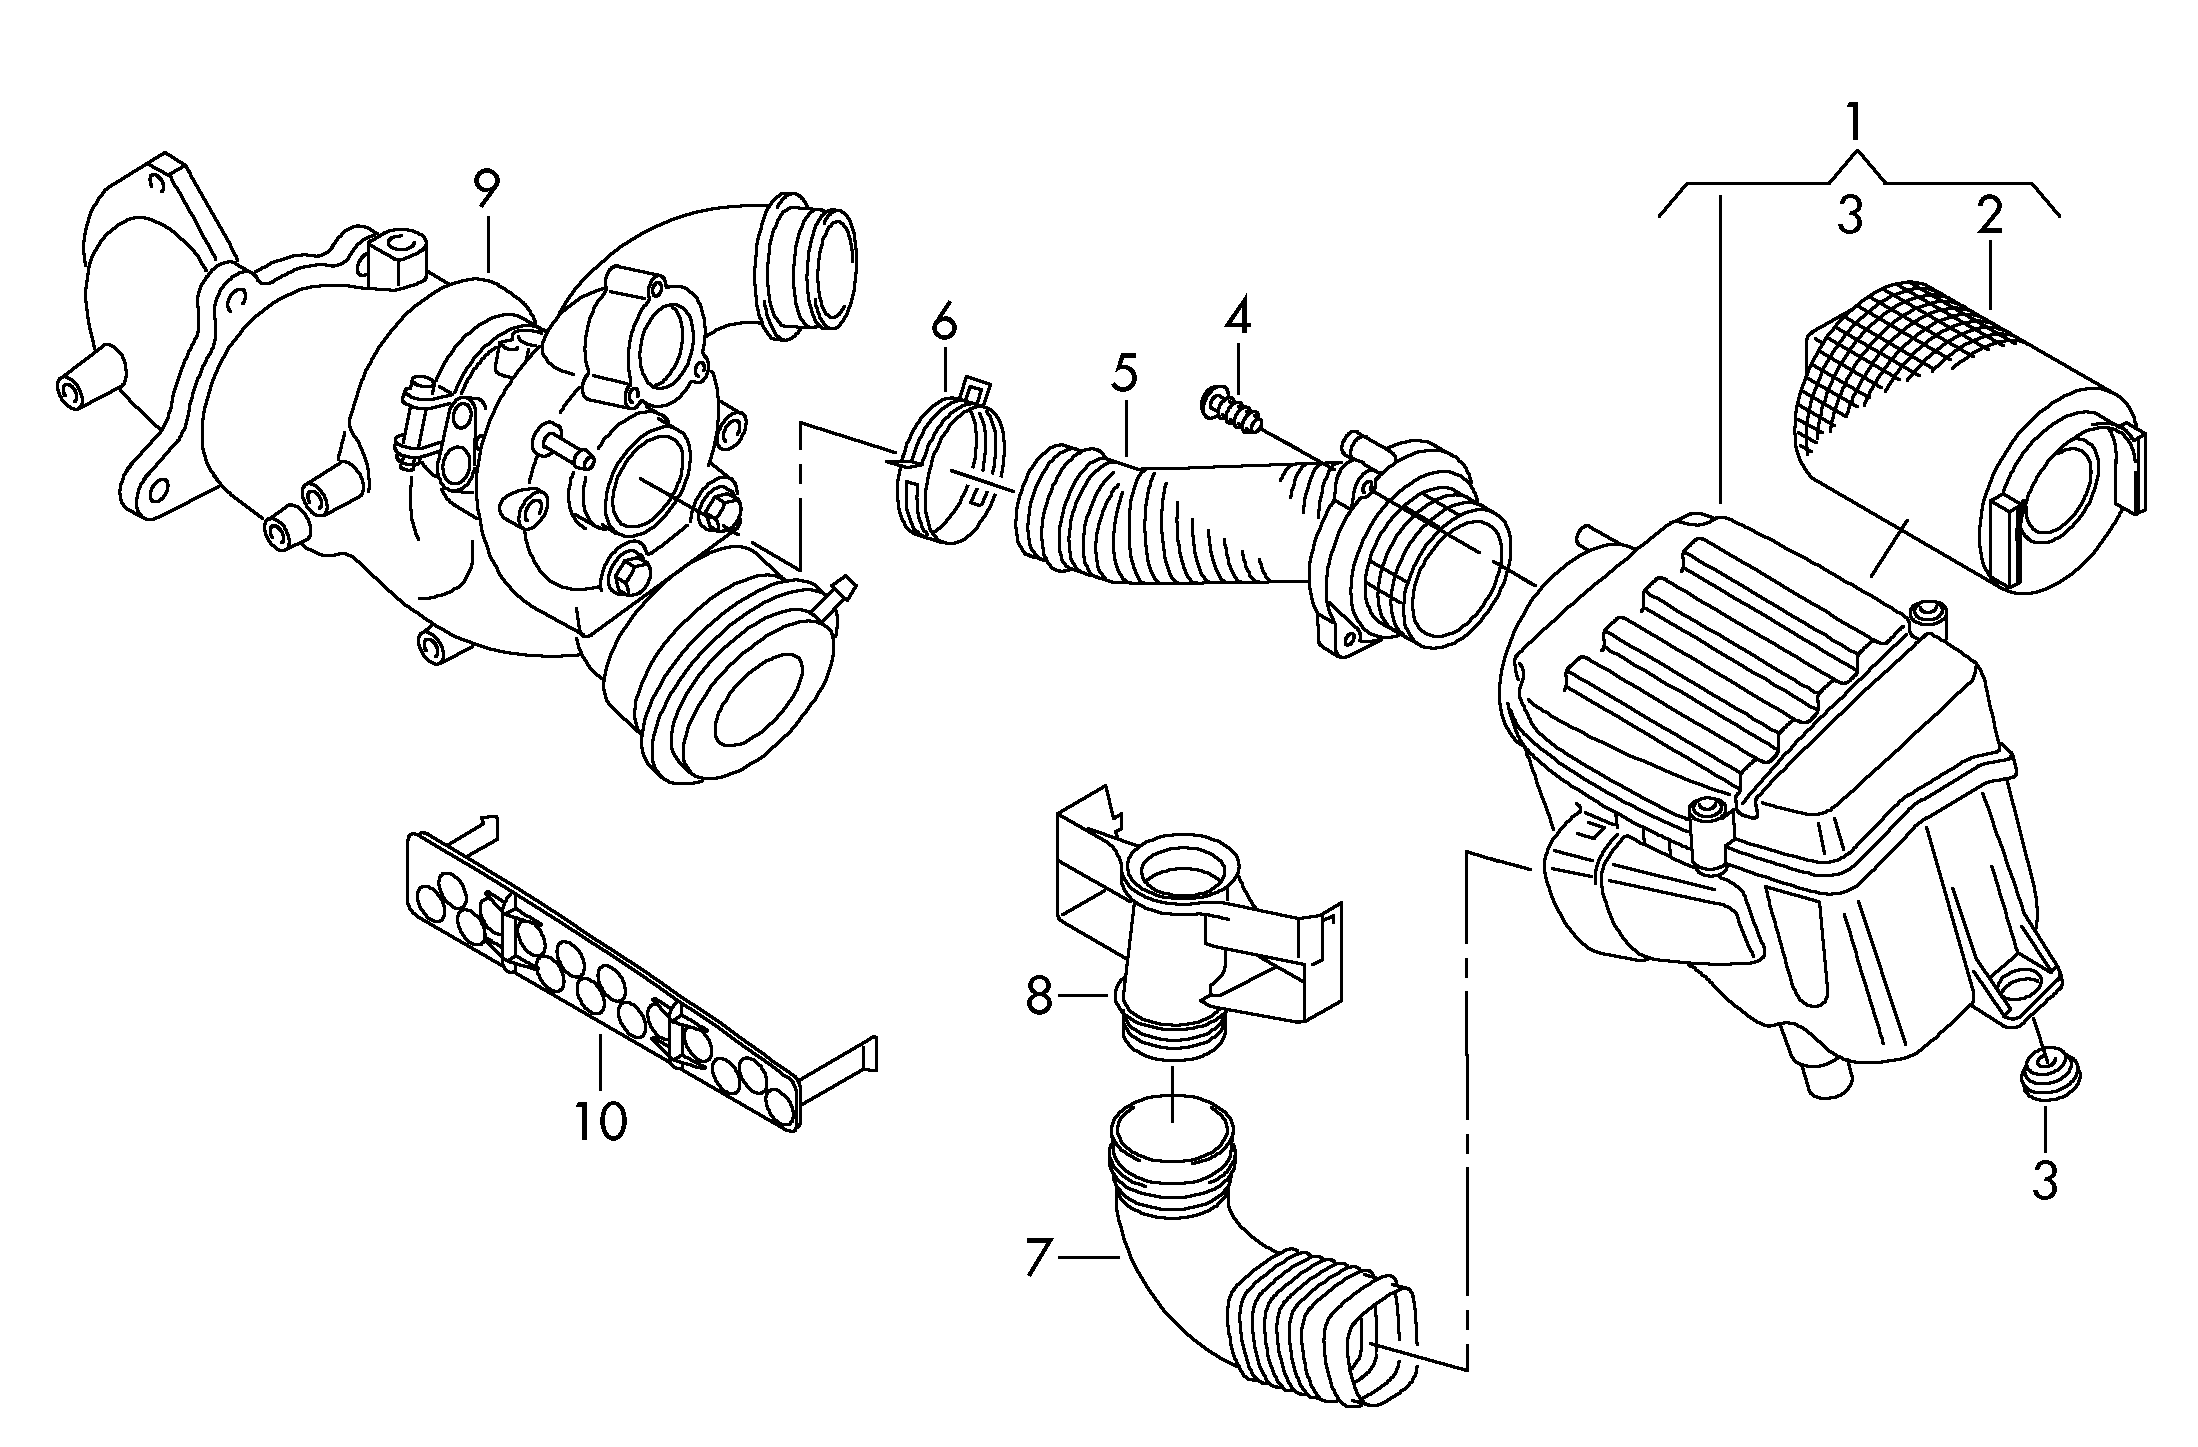 Air filter with connecting<br>parts 1.4ltr.1.2 Ltr. - Golf/Variant/4Motion - golf